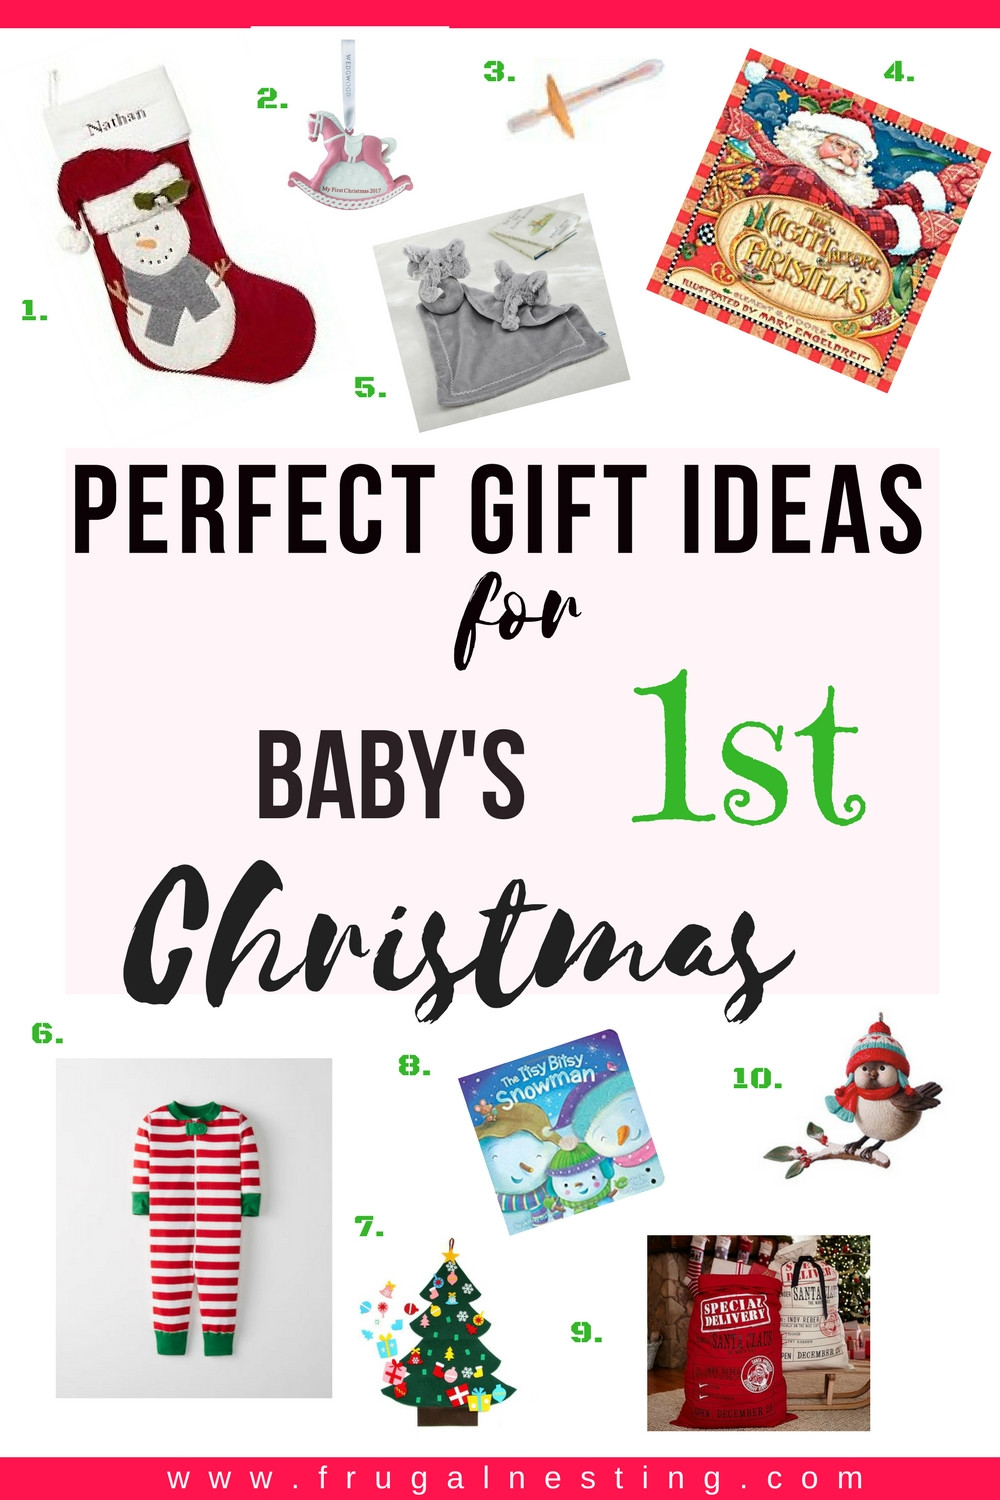 Baby'S First Christmas Gift Ideas
 Unique Gift Ideas for Baby s 1st Christmas